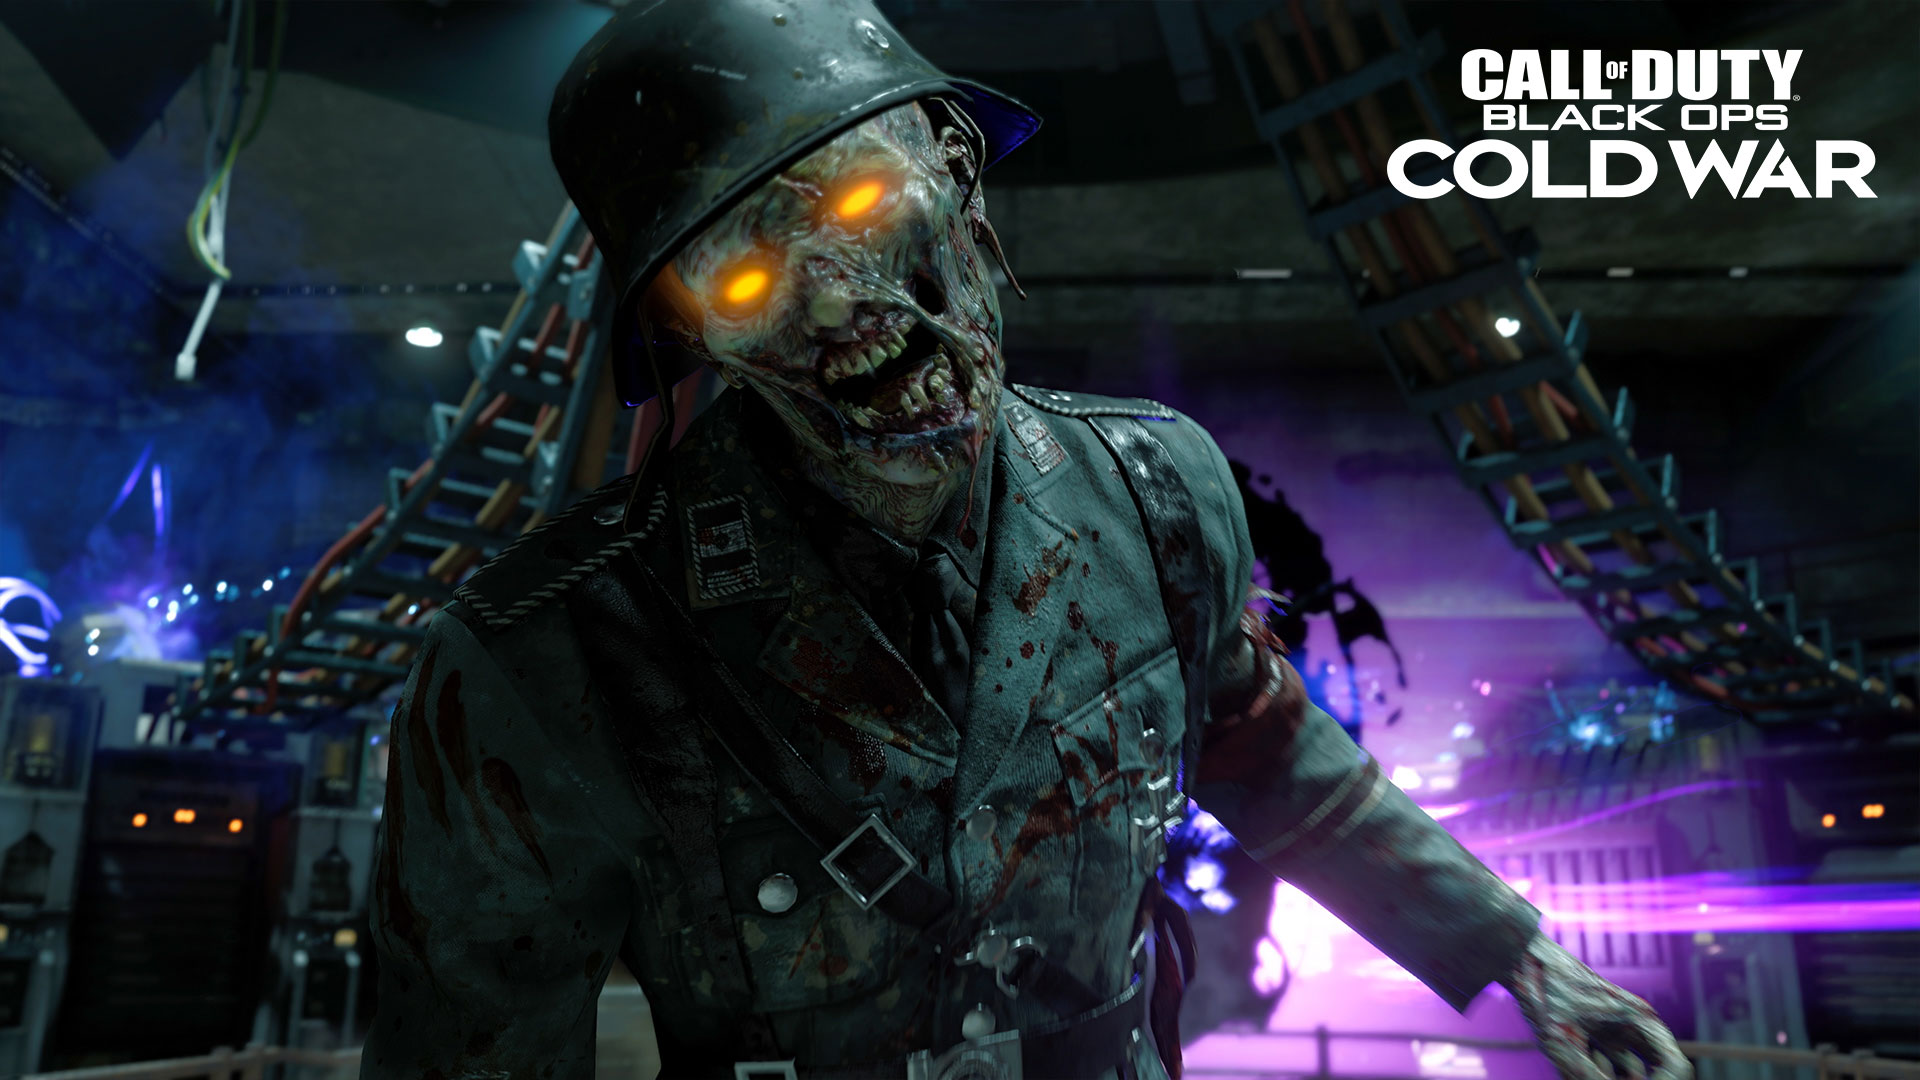 Black Ops Cold War Zombies Outbreak Mode (Credit: Treyarch)